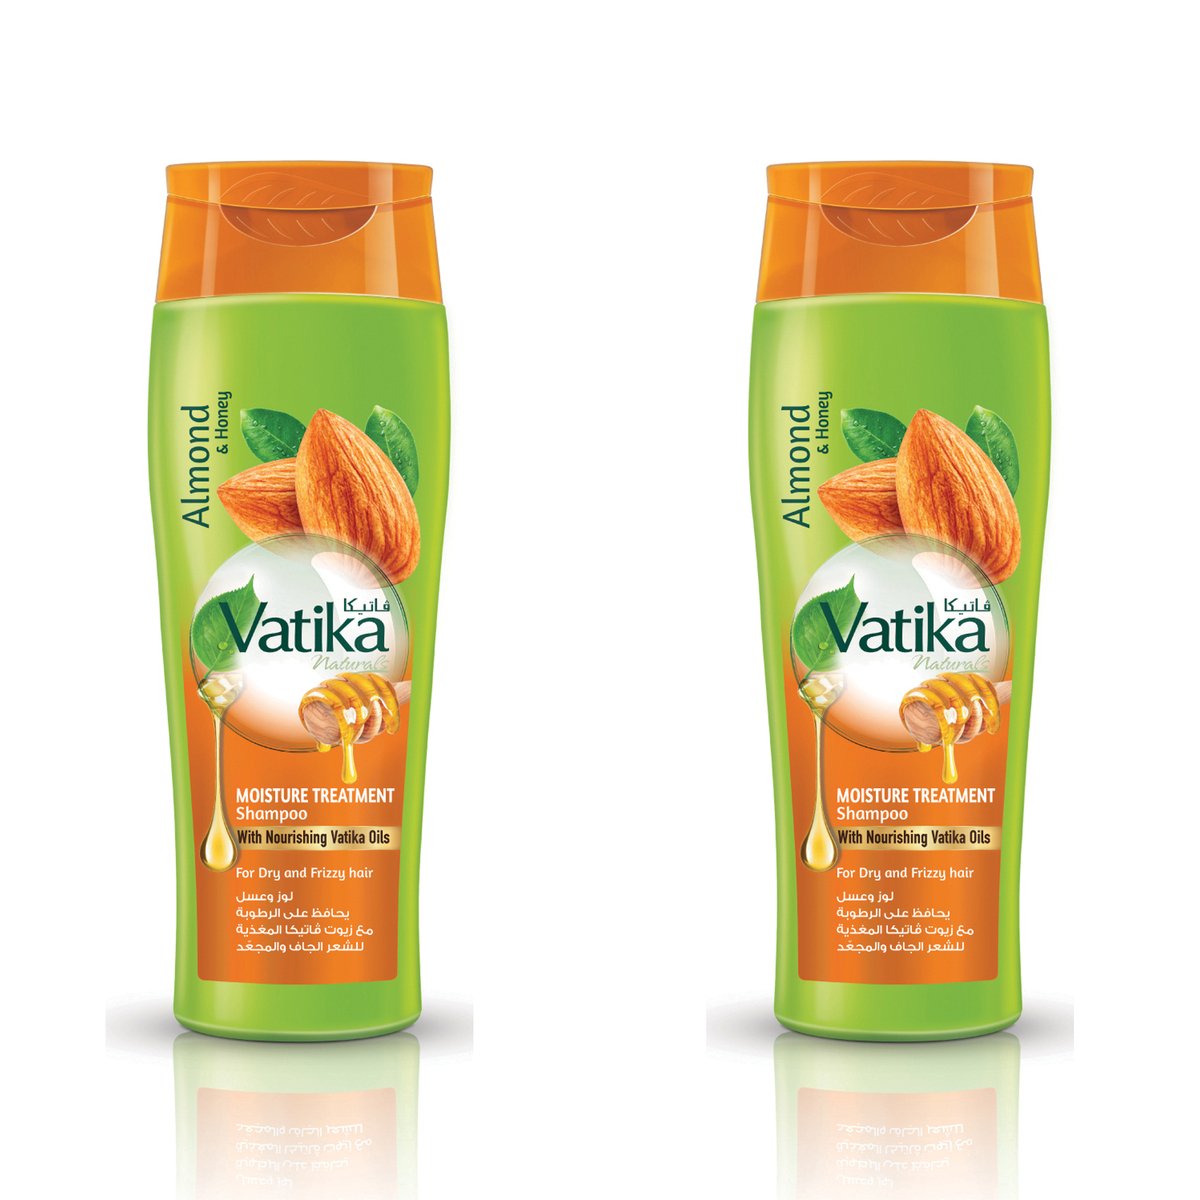 Vatika Naturals Moisture Treatment Shampoo Enriched with Almond & Honey For Dry & Frizzy Hair With Nourishing Vatika Oils 2 x 400 ml